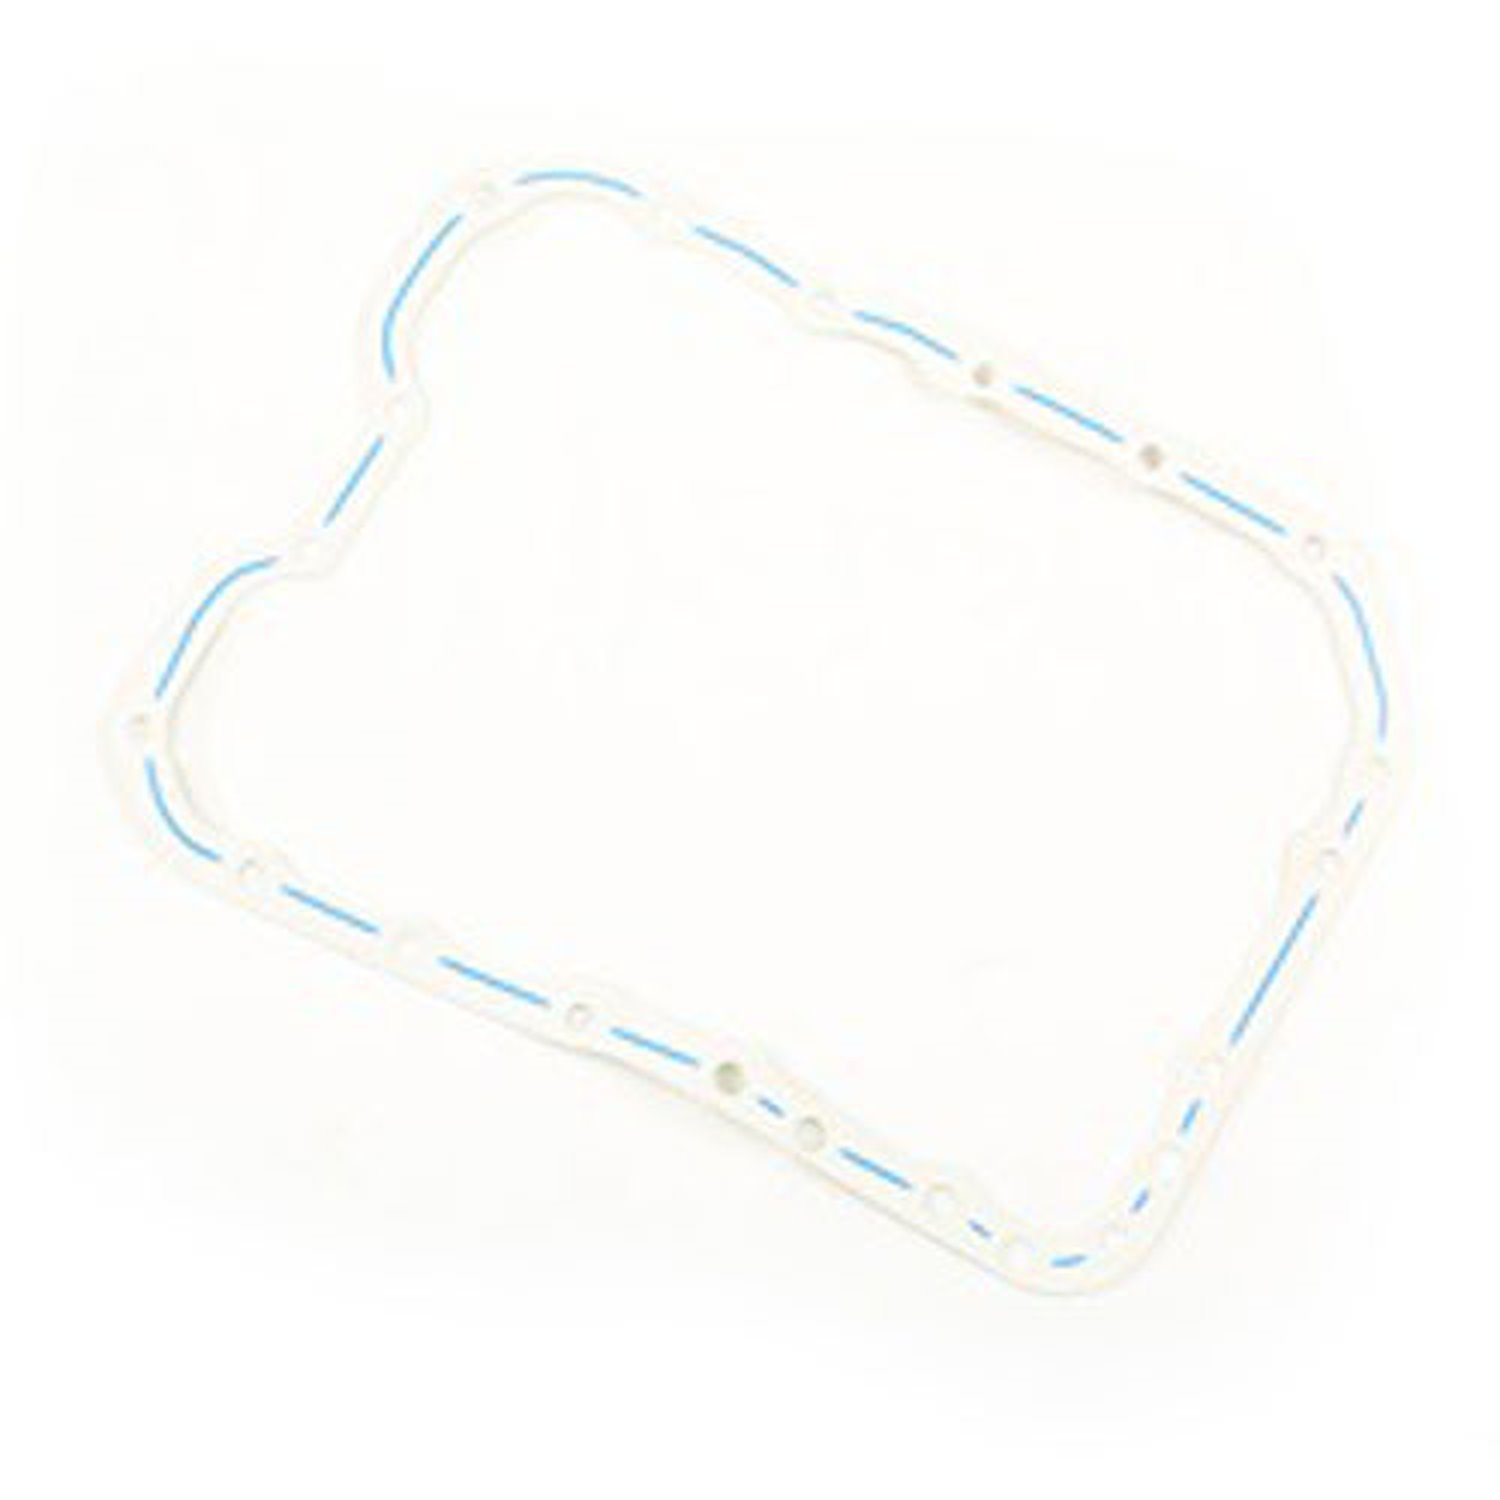 This oil pan gasket from Omix-ADA fits 2.0L